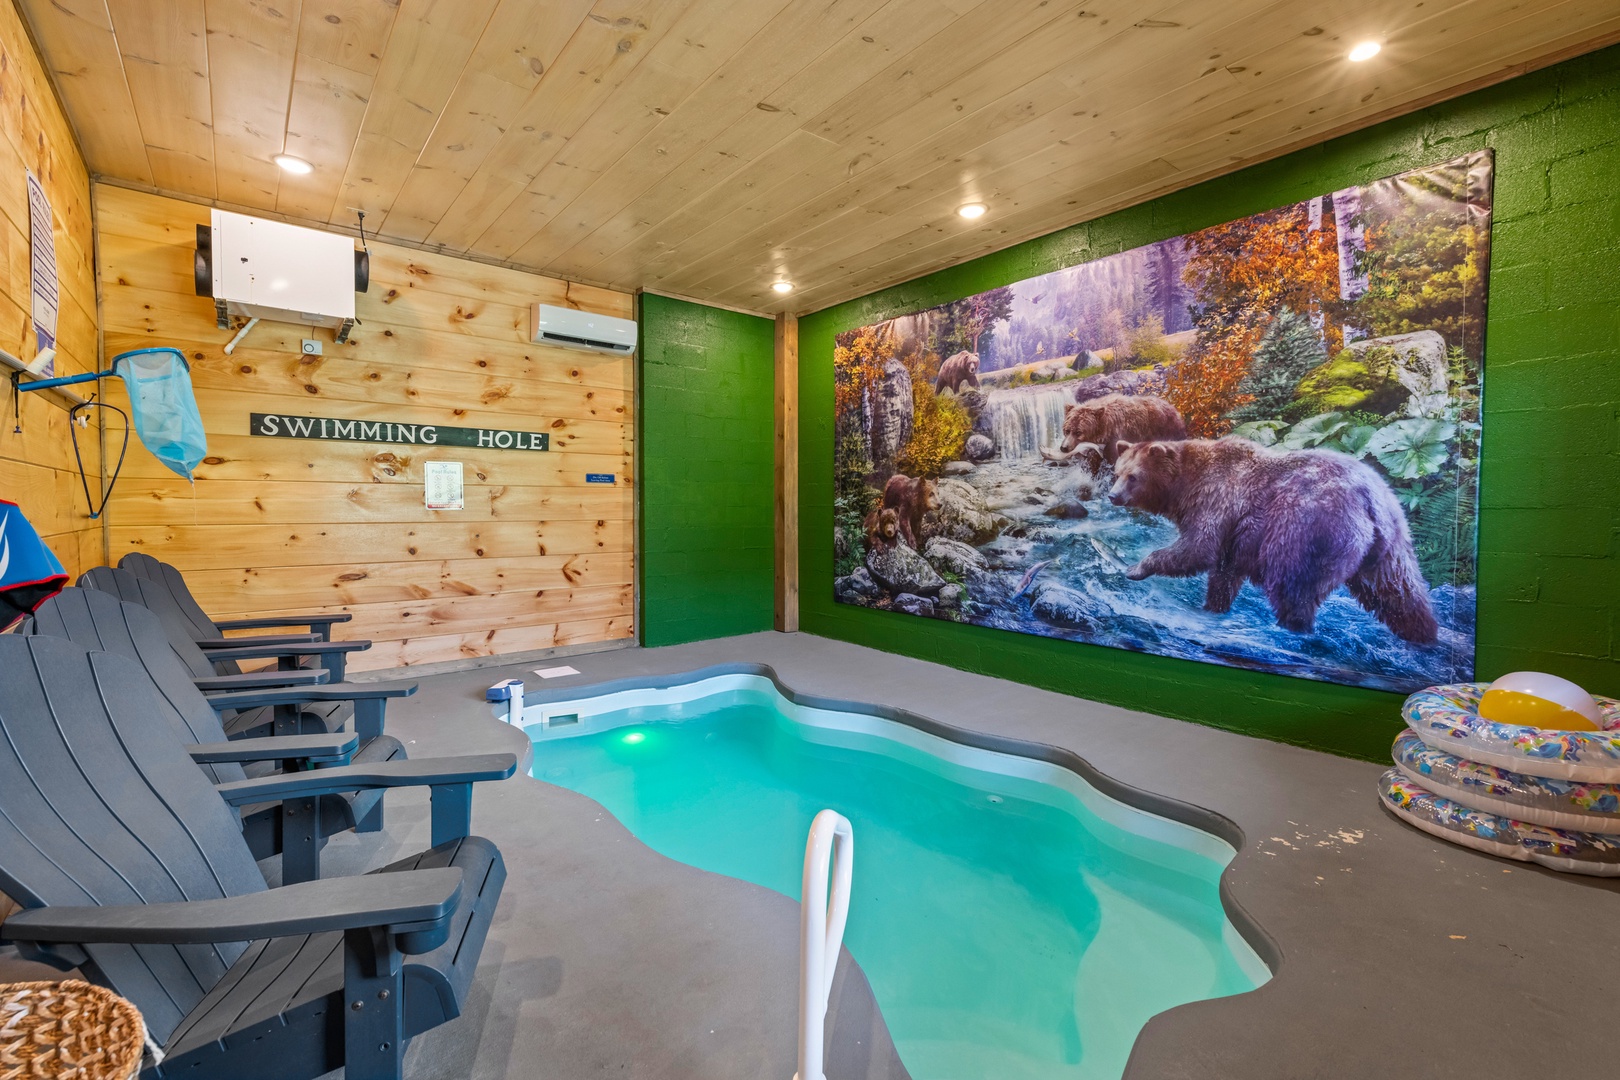 Dive into relaxation with the private indoor pool